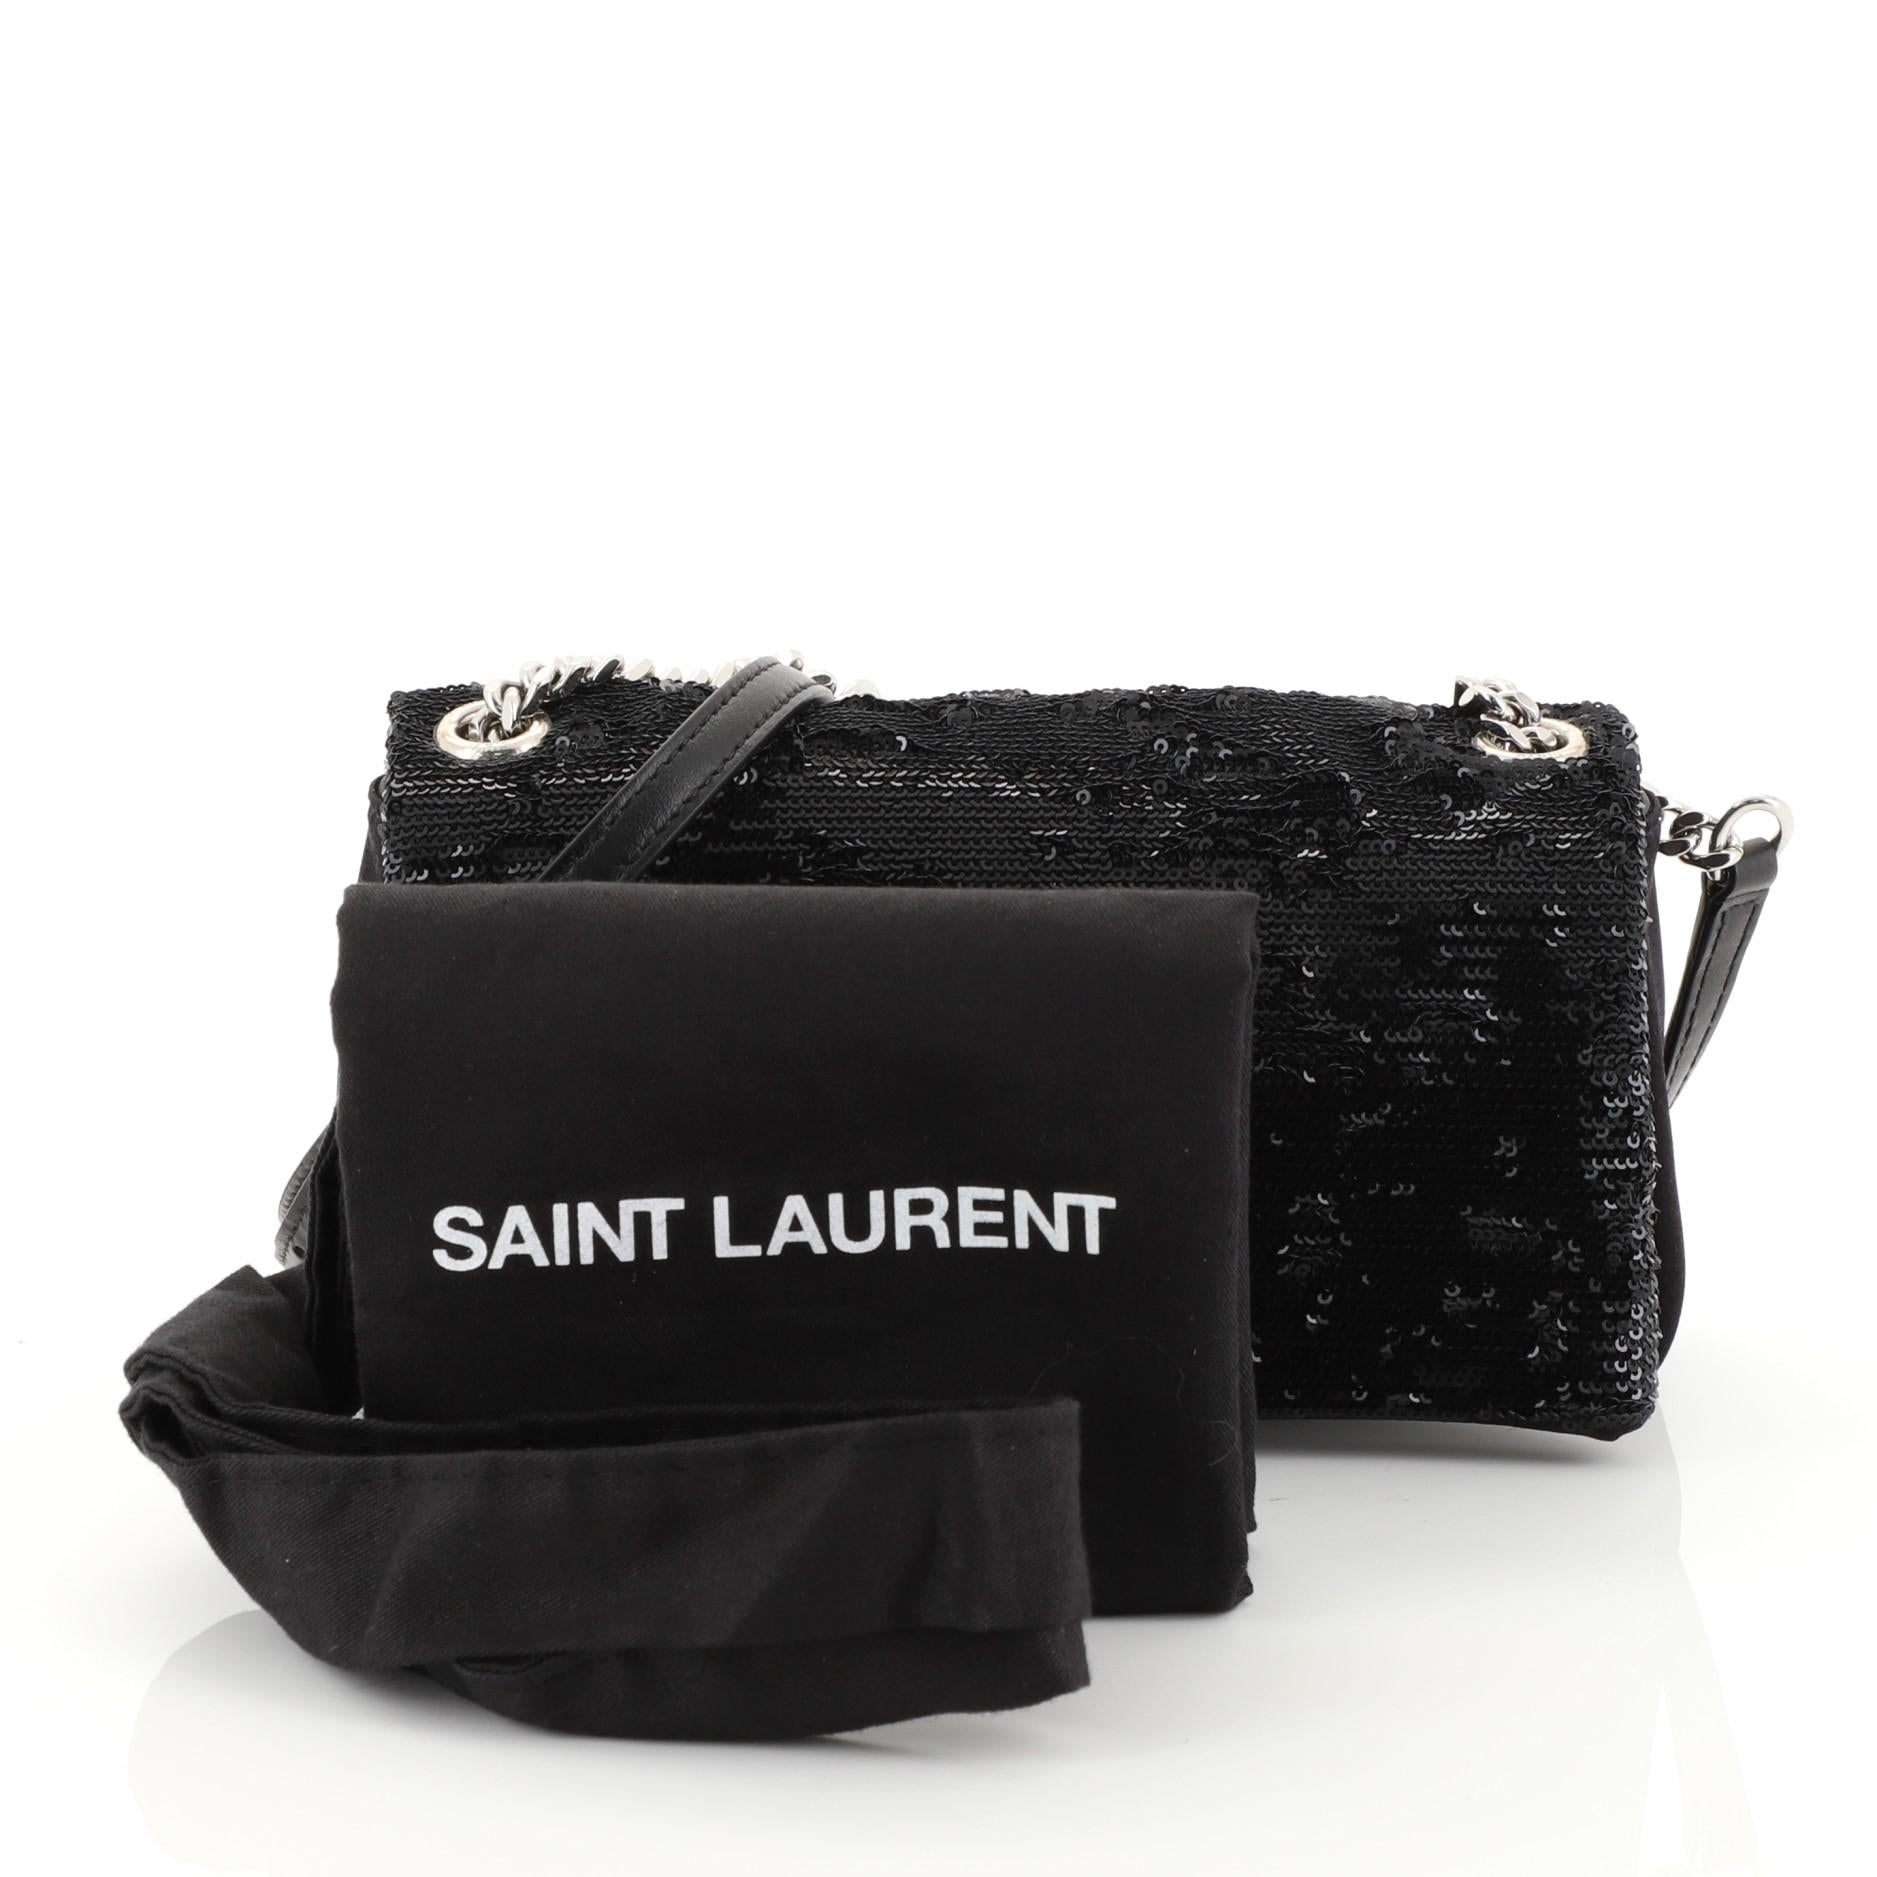 This Saint Laurent West Hollywood Crossbody Bag Sequins Toy, crafted in black sequins, features an adjustable leather and chain shoulder strap, front flap with iconic YSL logo, and silver-tone hardware. Its magnetic snap button closure opens to a